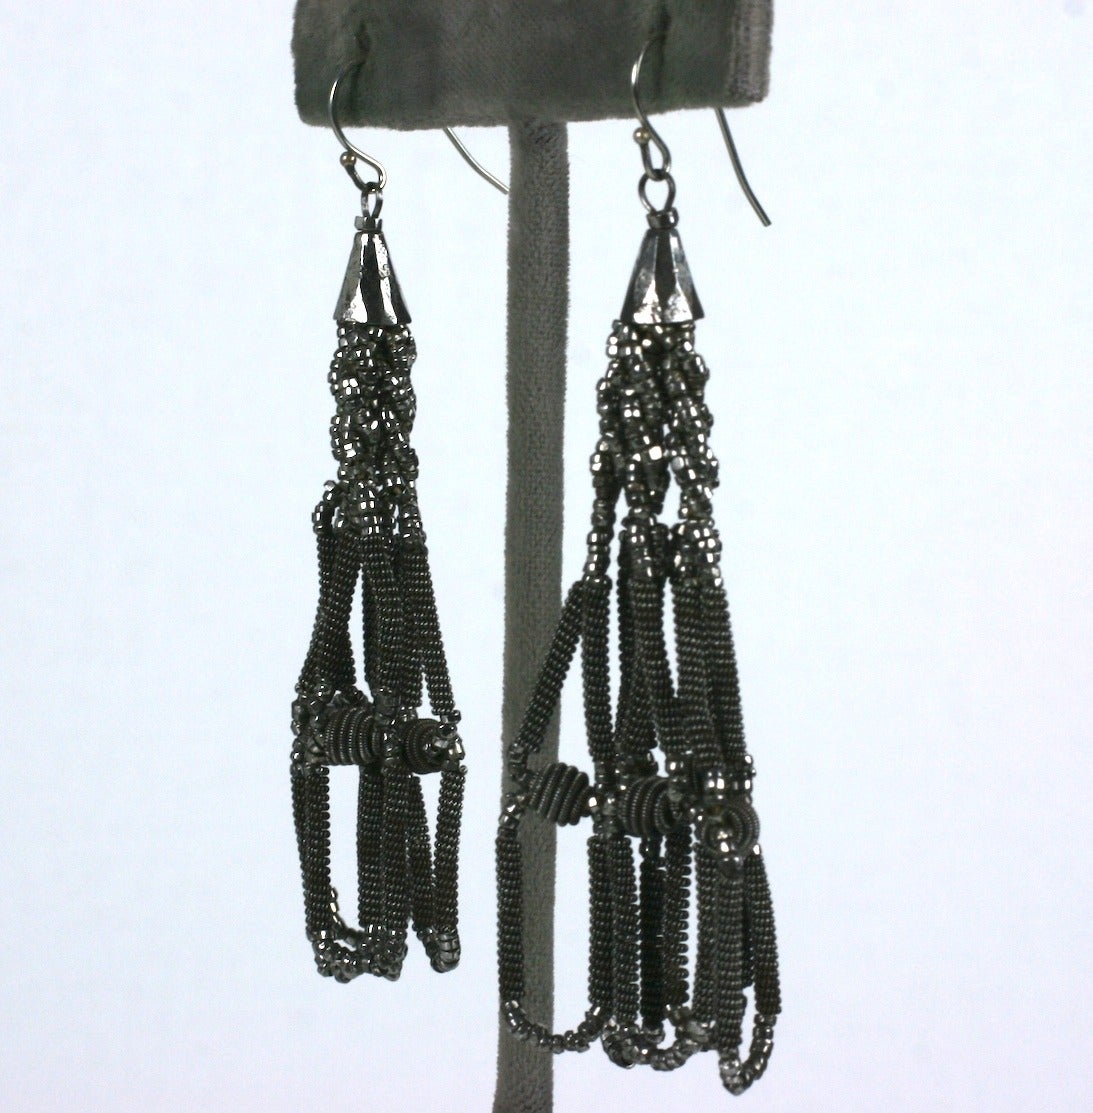 Cut Steel and Silesian Wire tassel Earrings from the mid 19th Century. Beautifully crafted with cut steel beads and silesian wire work twisted into each tassel. 1860's UK. 3